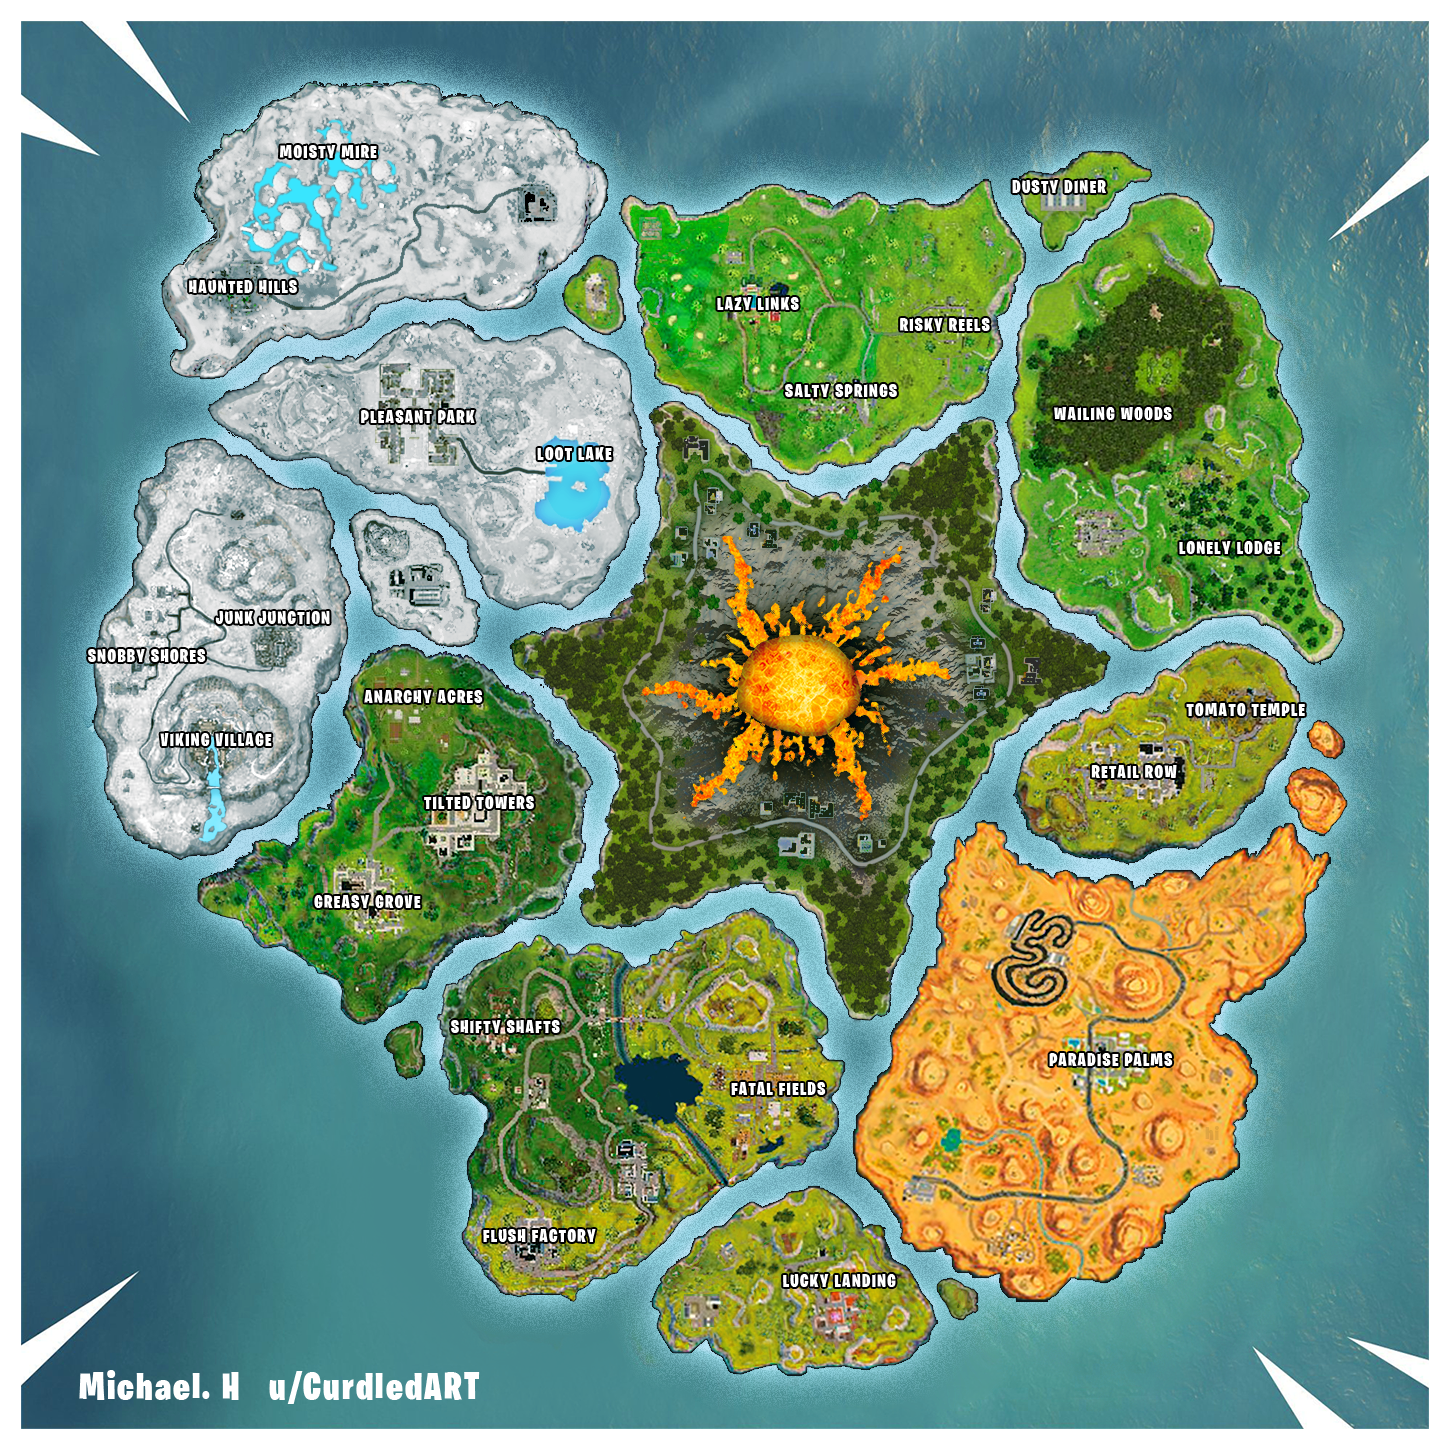 Fortnite map change concept There havent been any major changes to the Fortnite map for some time and a larg. Gaming wallpaper, Best gaming wallpaper, Fortnite